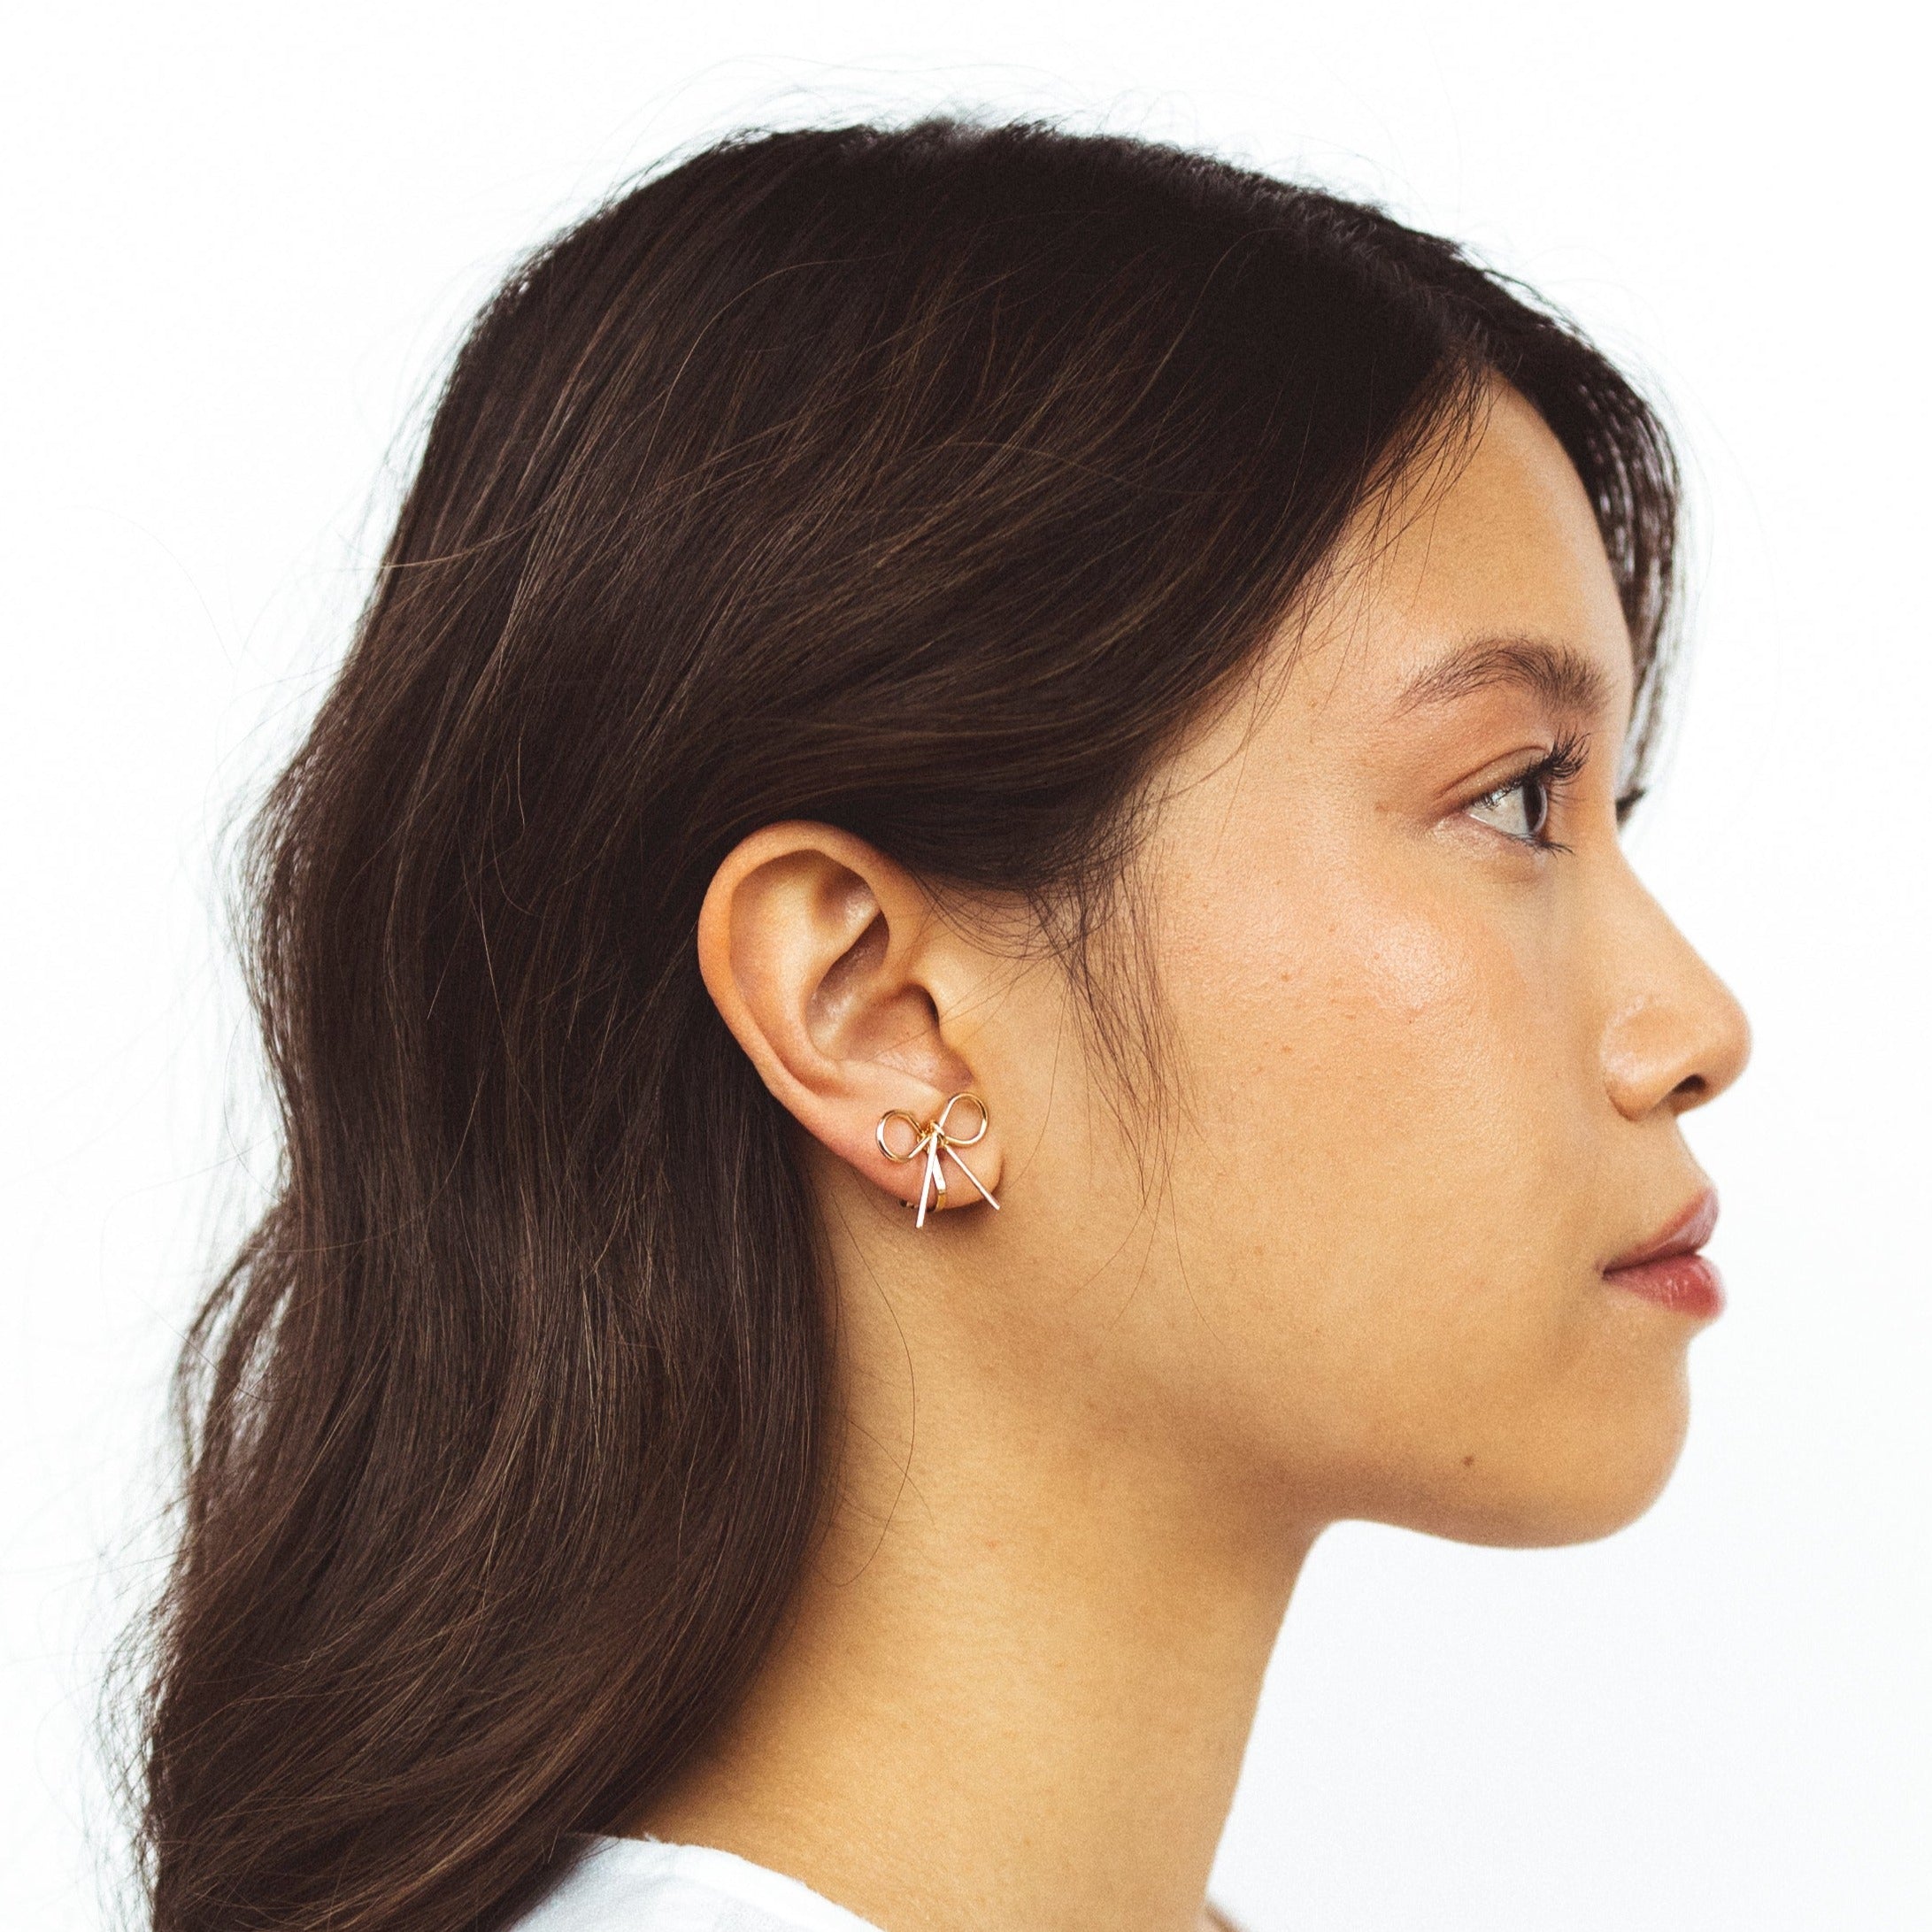 A model wearing the Celia Clip On Earrings. Designed with a 24-hour hold and adjustable fit, these earrings are perfect for sensitive or stretched ears. Elevate your style with elegance and comfort.